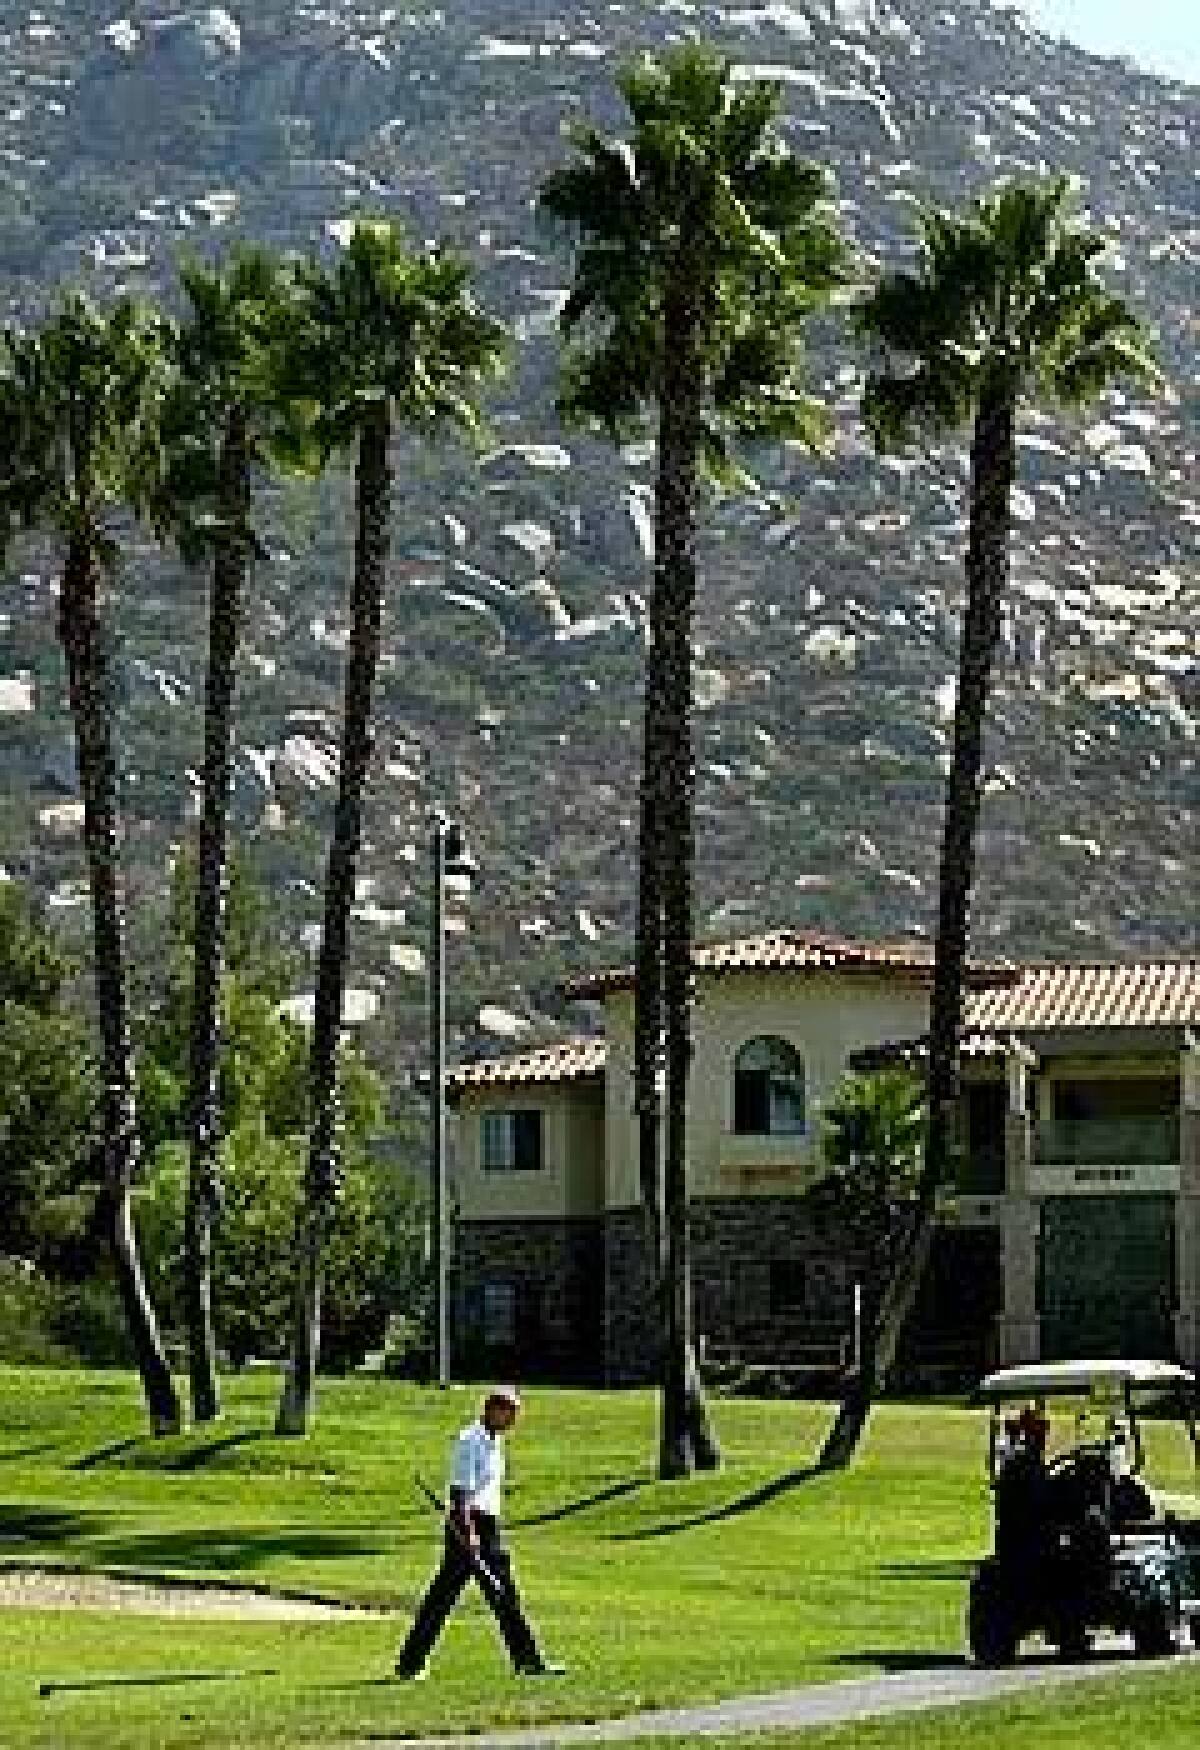 Golf is a highlight at the affordable Welk Resort north of Escondido.